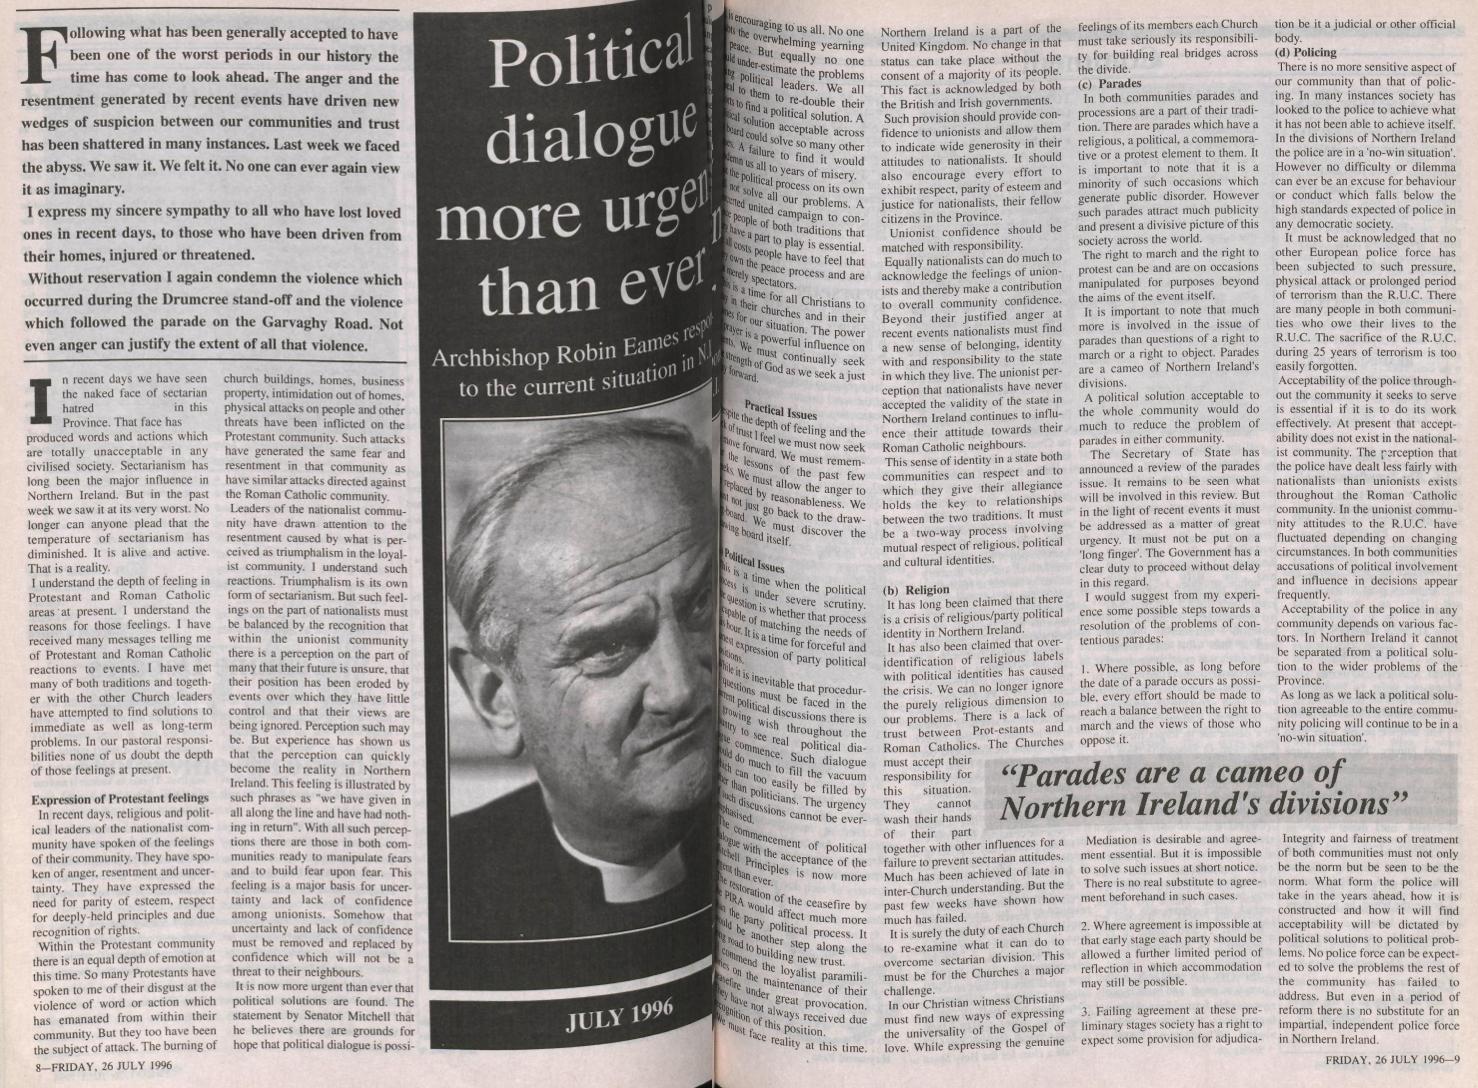 Archbishop Eames urges political dialogue in the Church of Ireland Gazette, 26th July 1996.